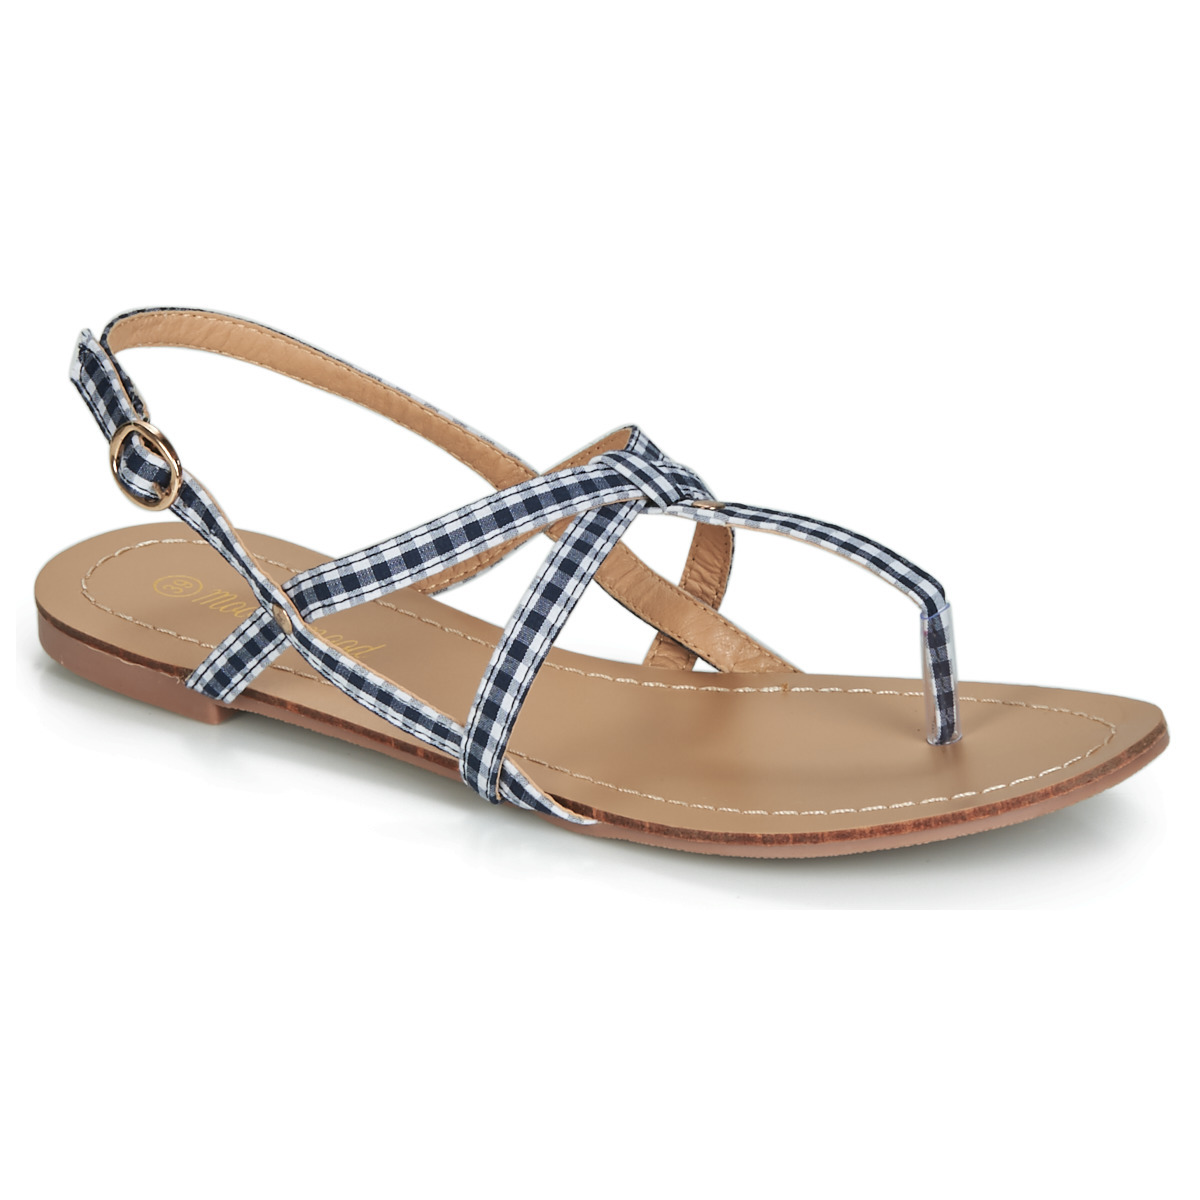 Spartoo Sandals Blue for Women by Moony Mood GOOFASH